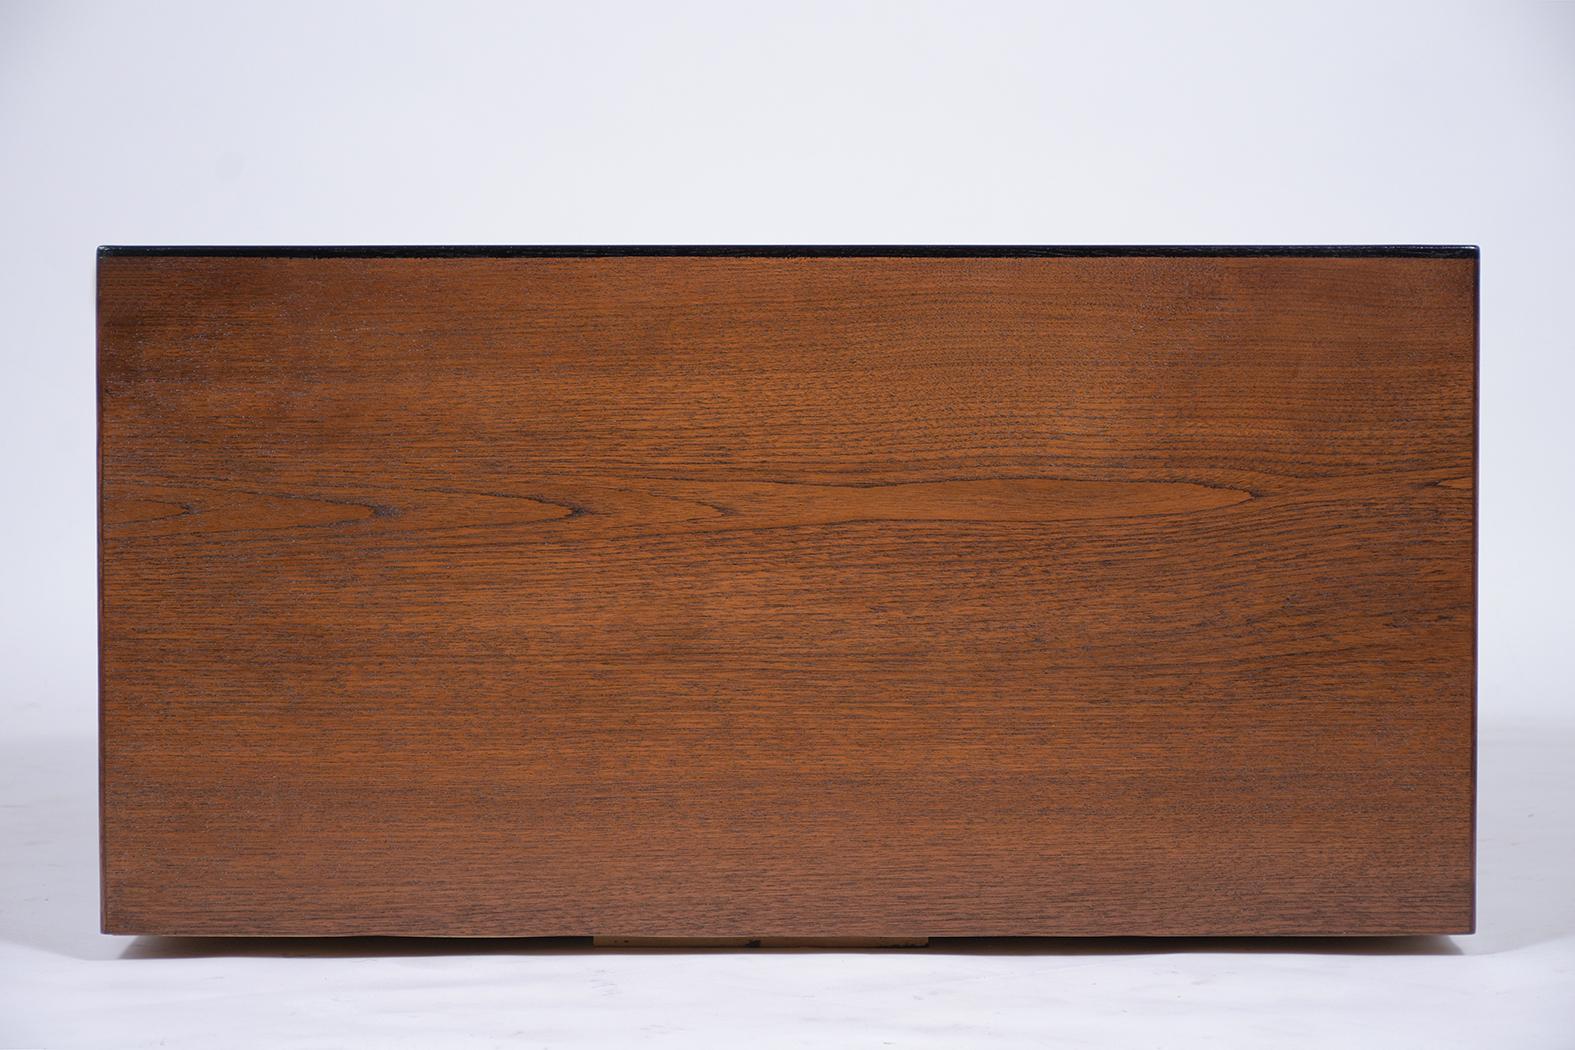 1960s Mid-Century Modern Danish Teak Wood Chest of Drawers with Ebonized Accents For Sale 6